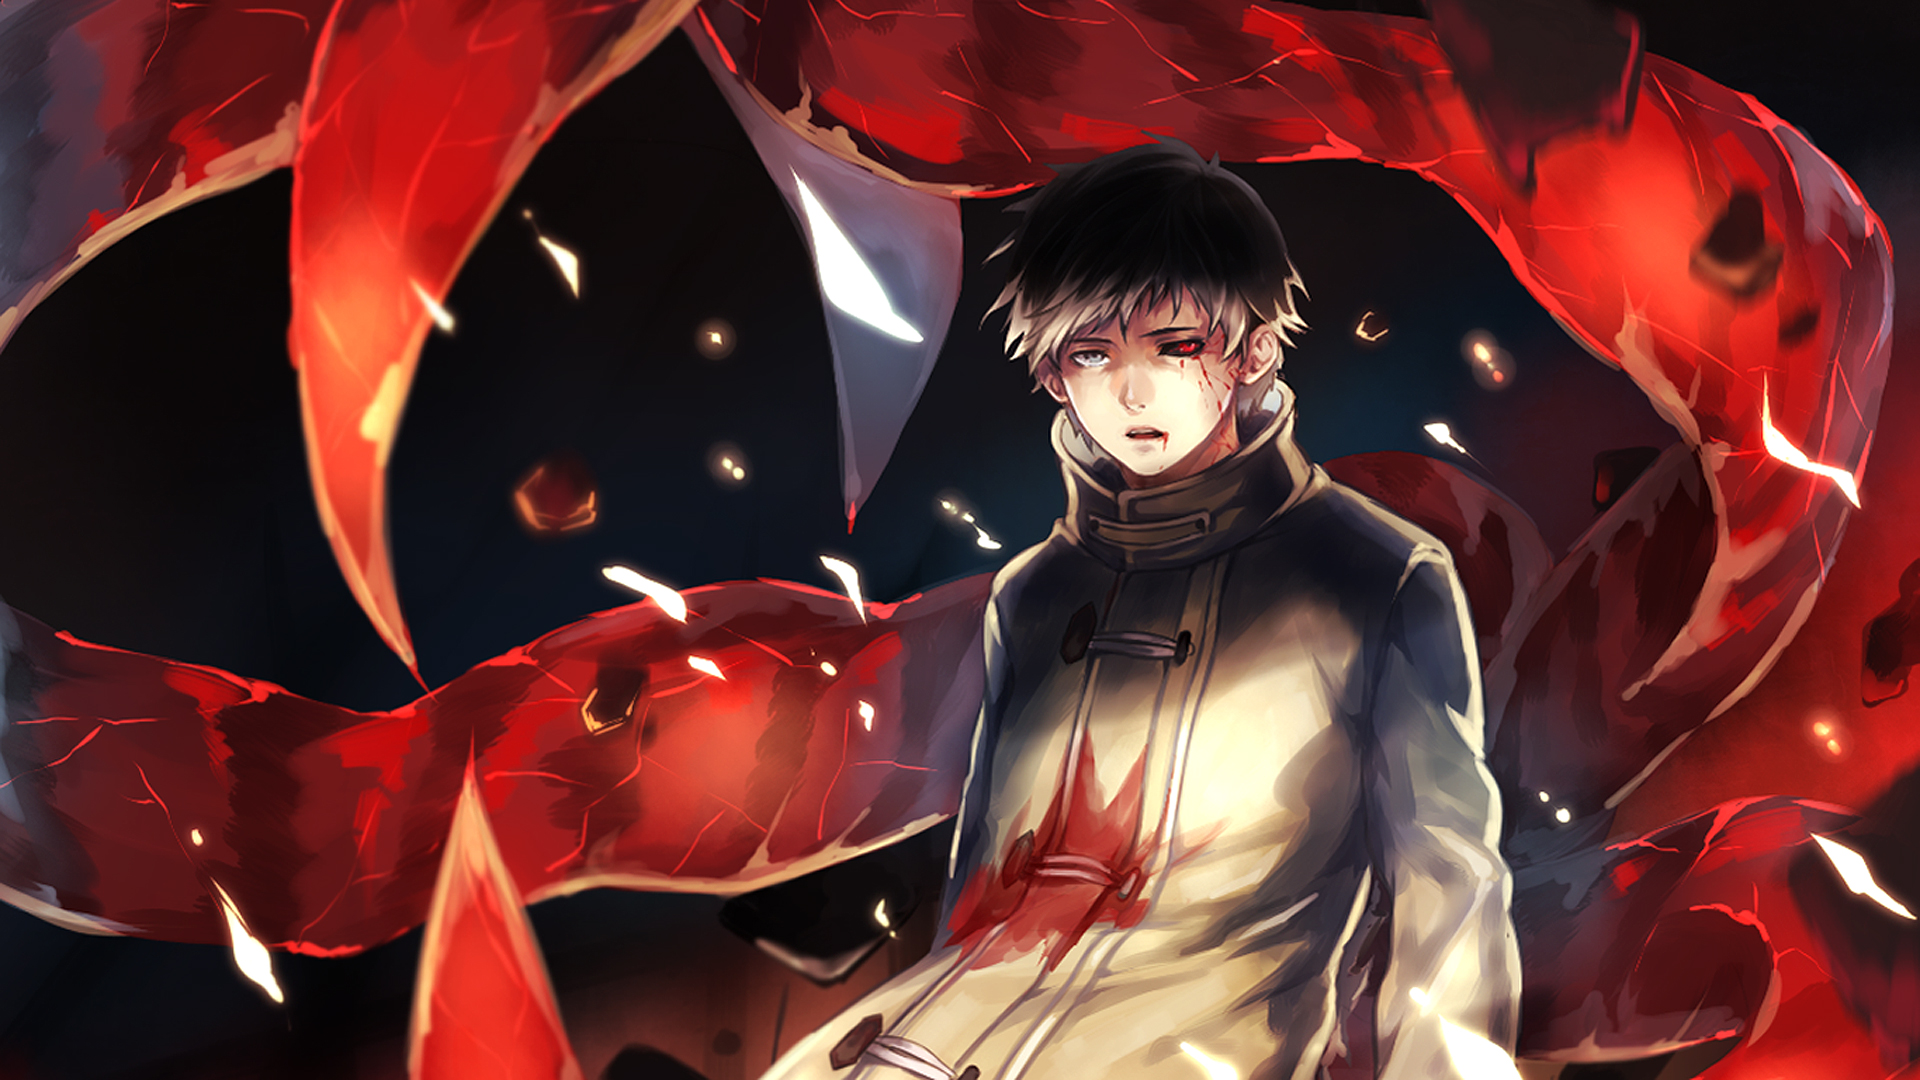 Tokyo Ghoul Full HD Wallpaper and Background Image | 1920x1080 | ID:596831